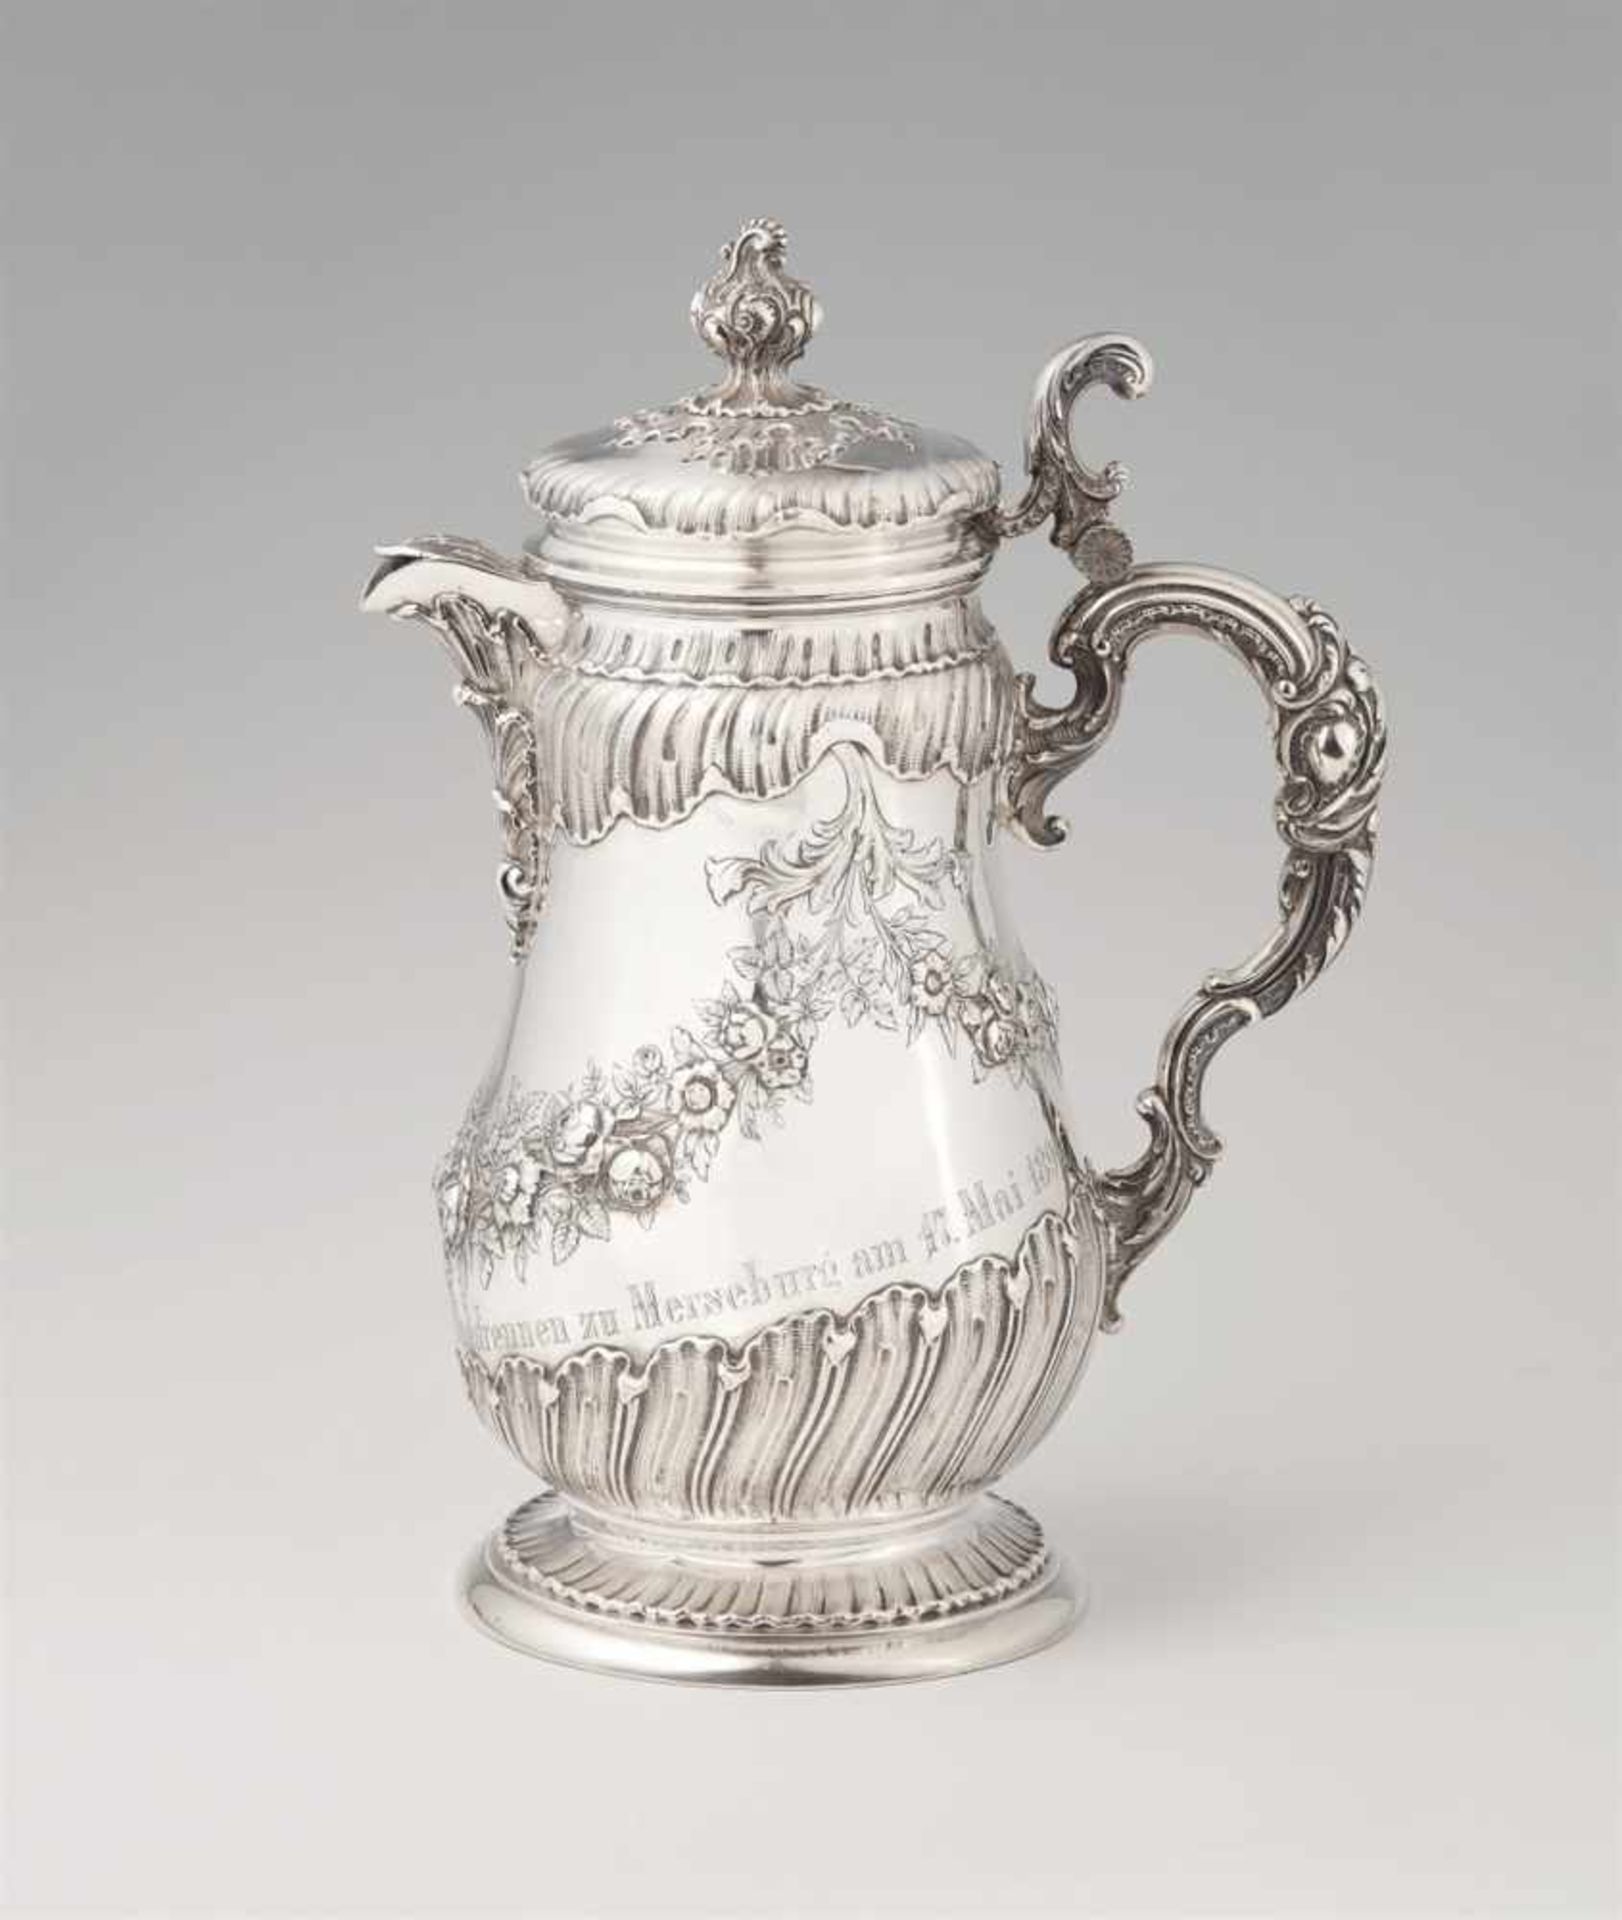 A Berlin silver horse racing trophyA large pear-form pitcher with slip lid, engraved "Kaiser Wilhelm - Bild 7 aus 11